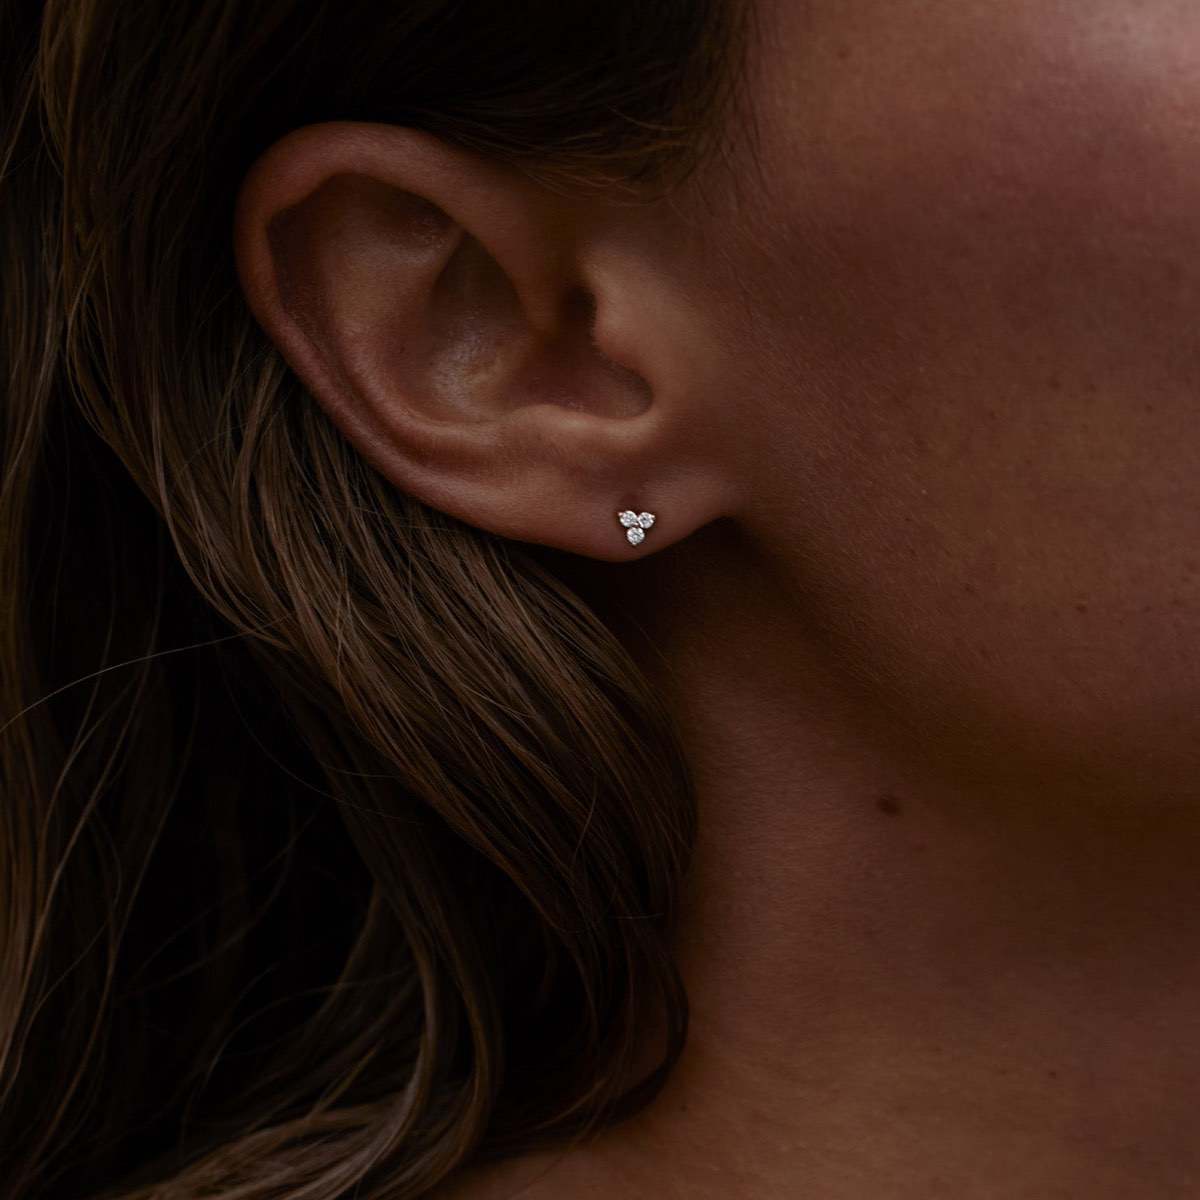 Model wears 9ct Yellow Gold Therefore Stud Earrings made for everyday wear.